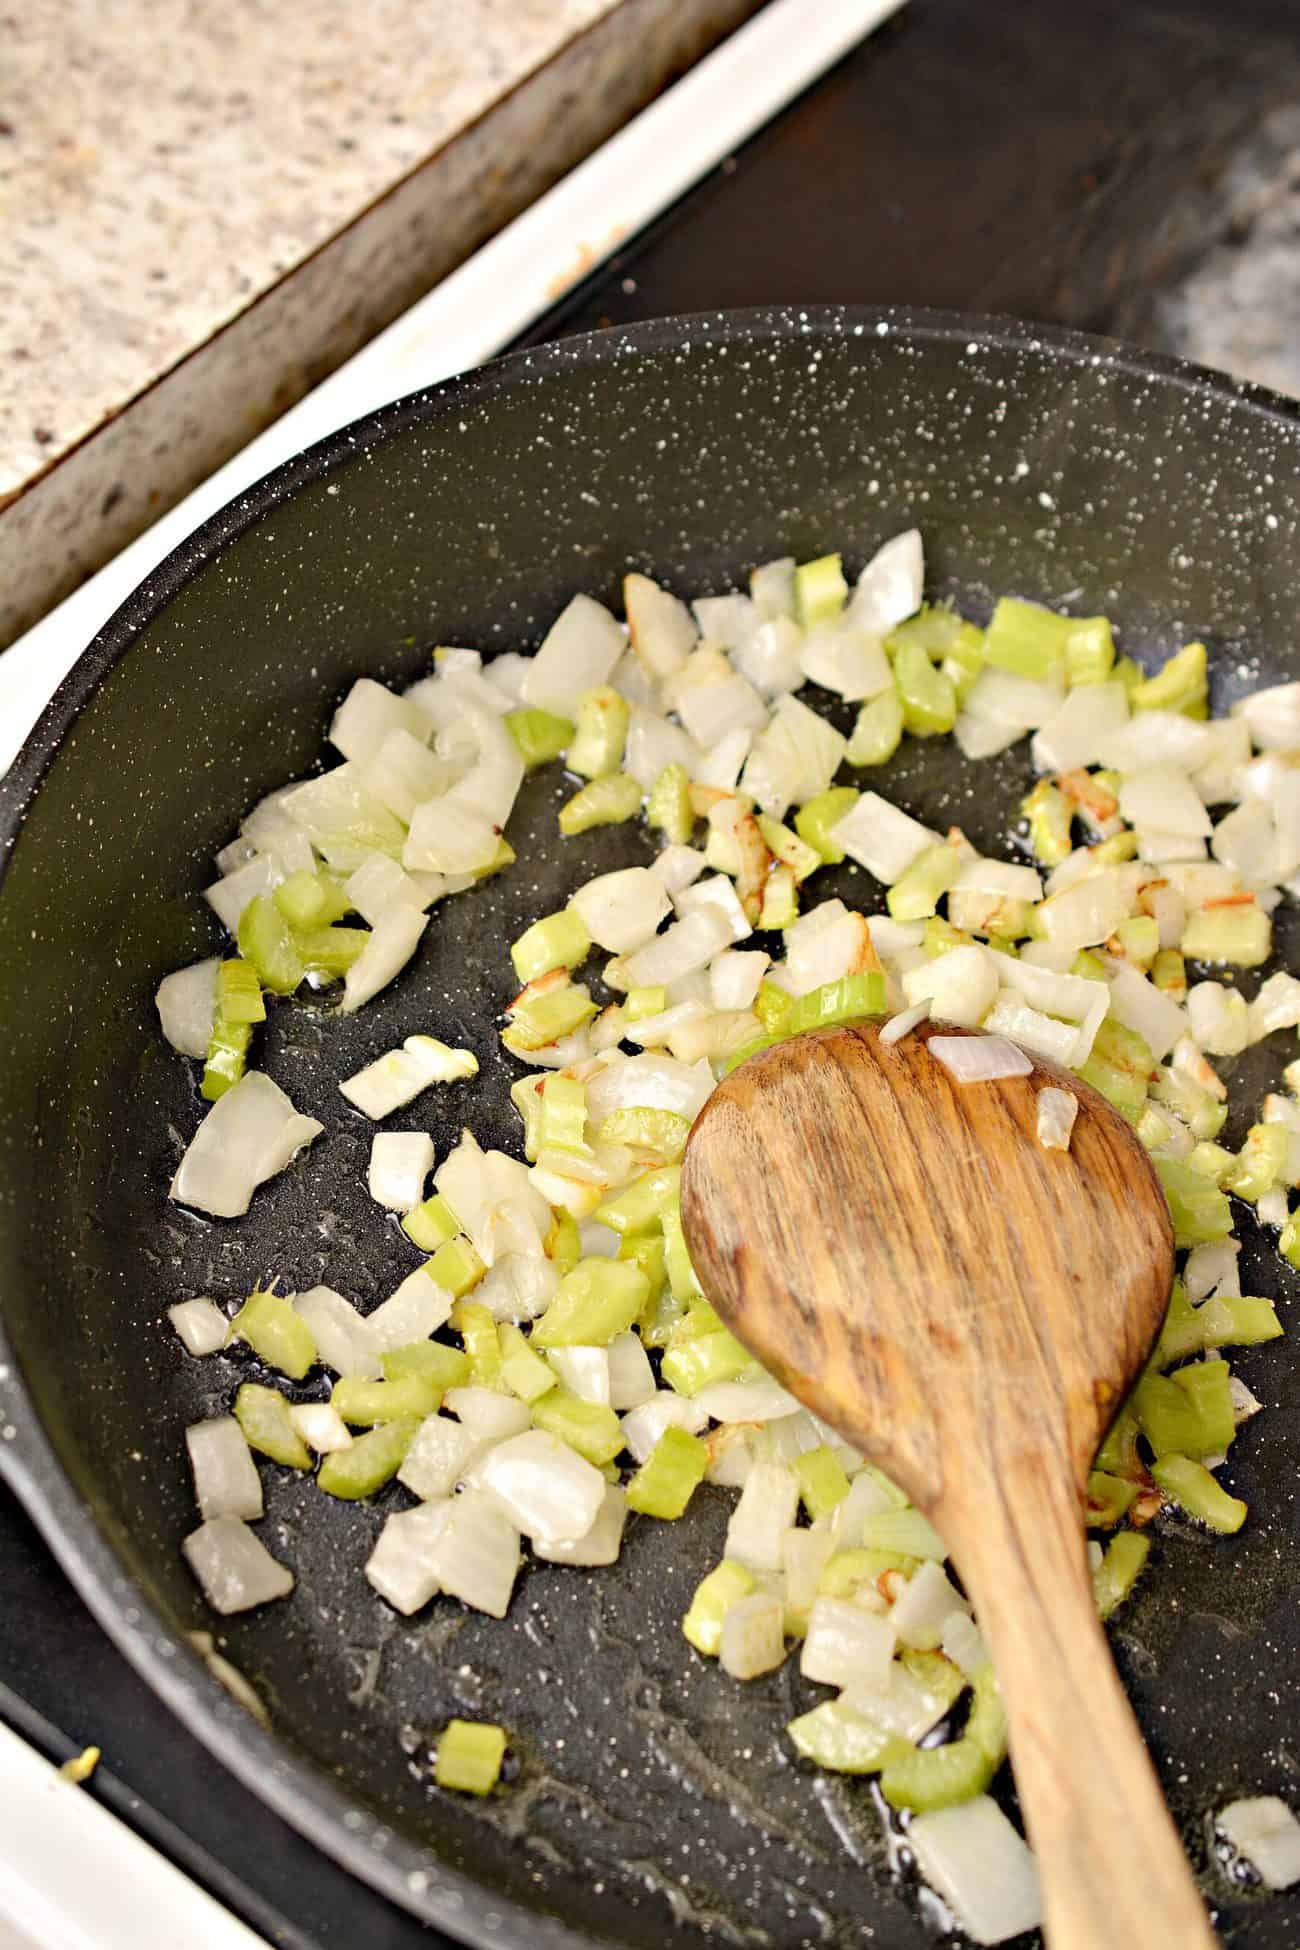 Add the butter, onions, and celery to a skillet and saute until the vegetables have begun to soften